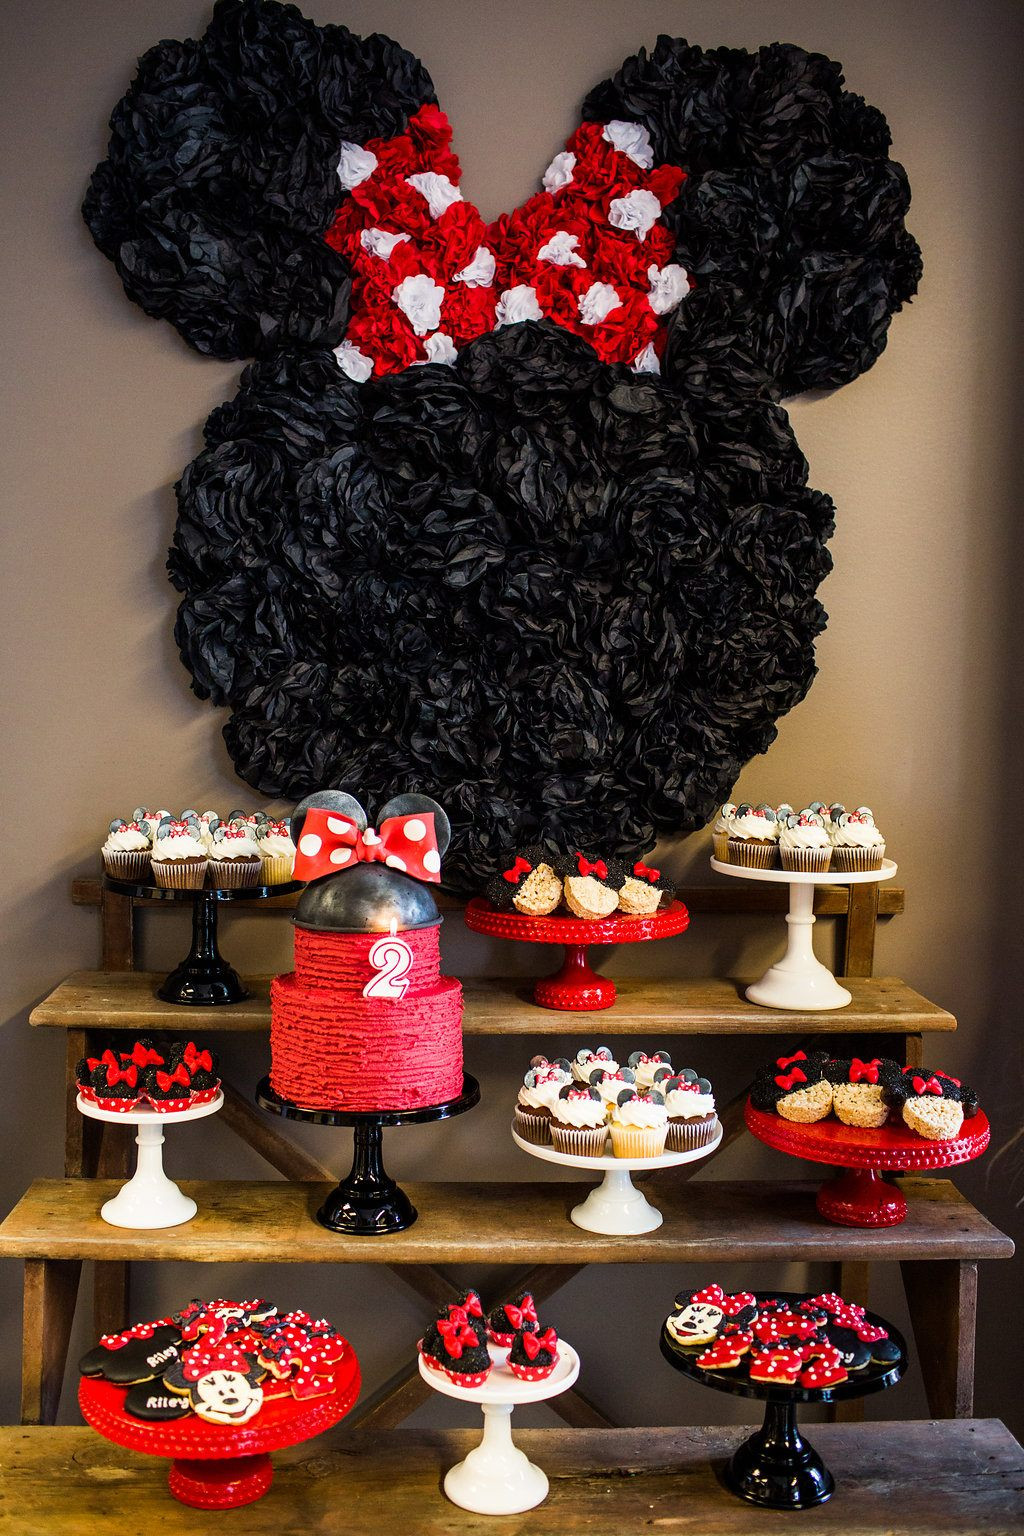 Ideas For A Minnie Mouse Birthday Party
 Top 10 Minnie Mouse Birthday Party Ideas by Lindi Haws of